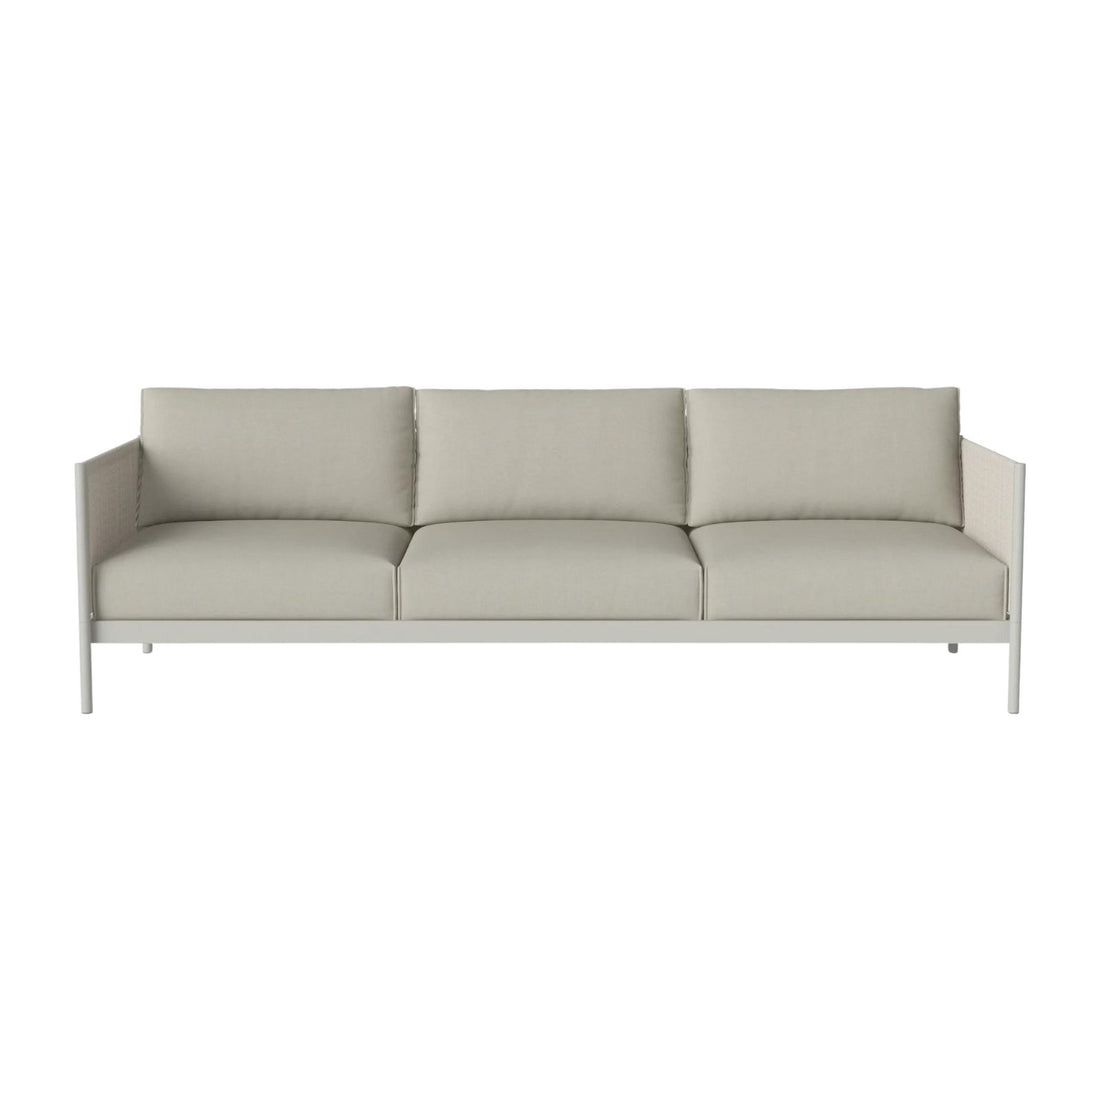 Track | Outdoor sofa 3 seater